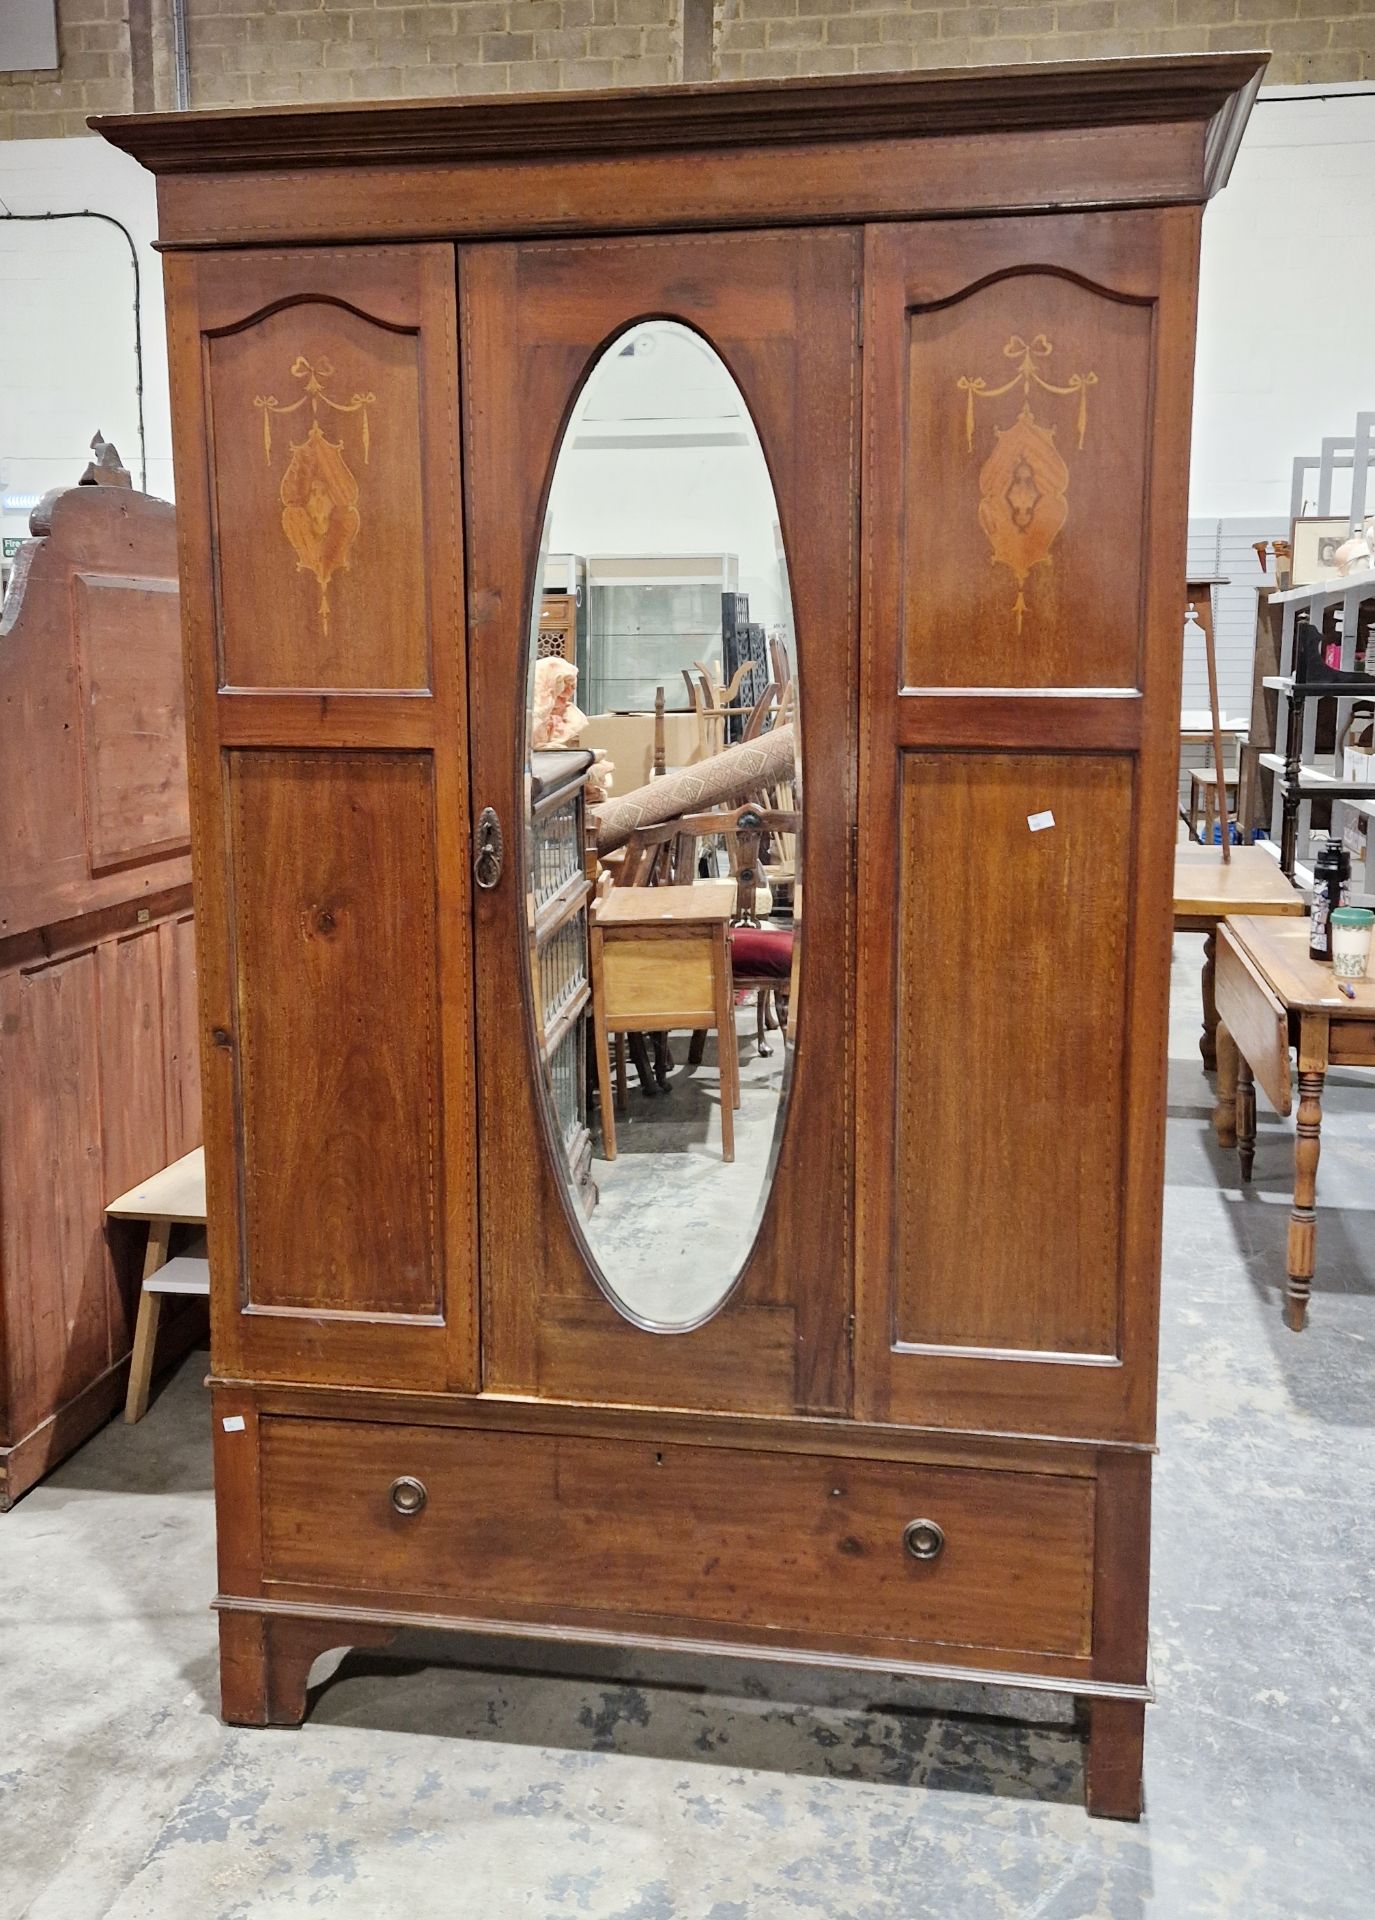 Edwardian mahogany single door wardrobe, the door with oval bevel edged mirror, inlaid marquetry and - Image 2 of 2